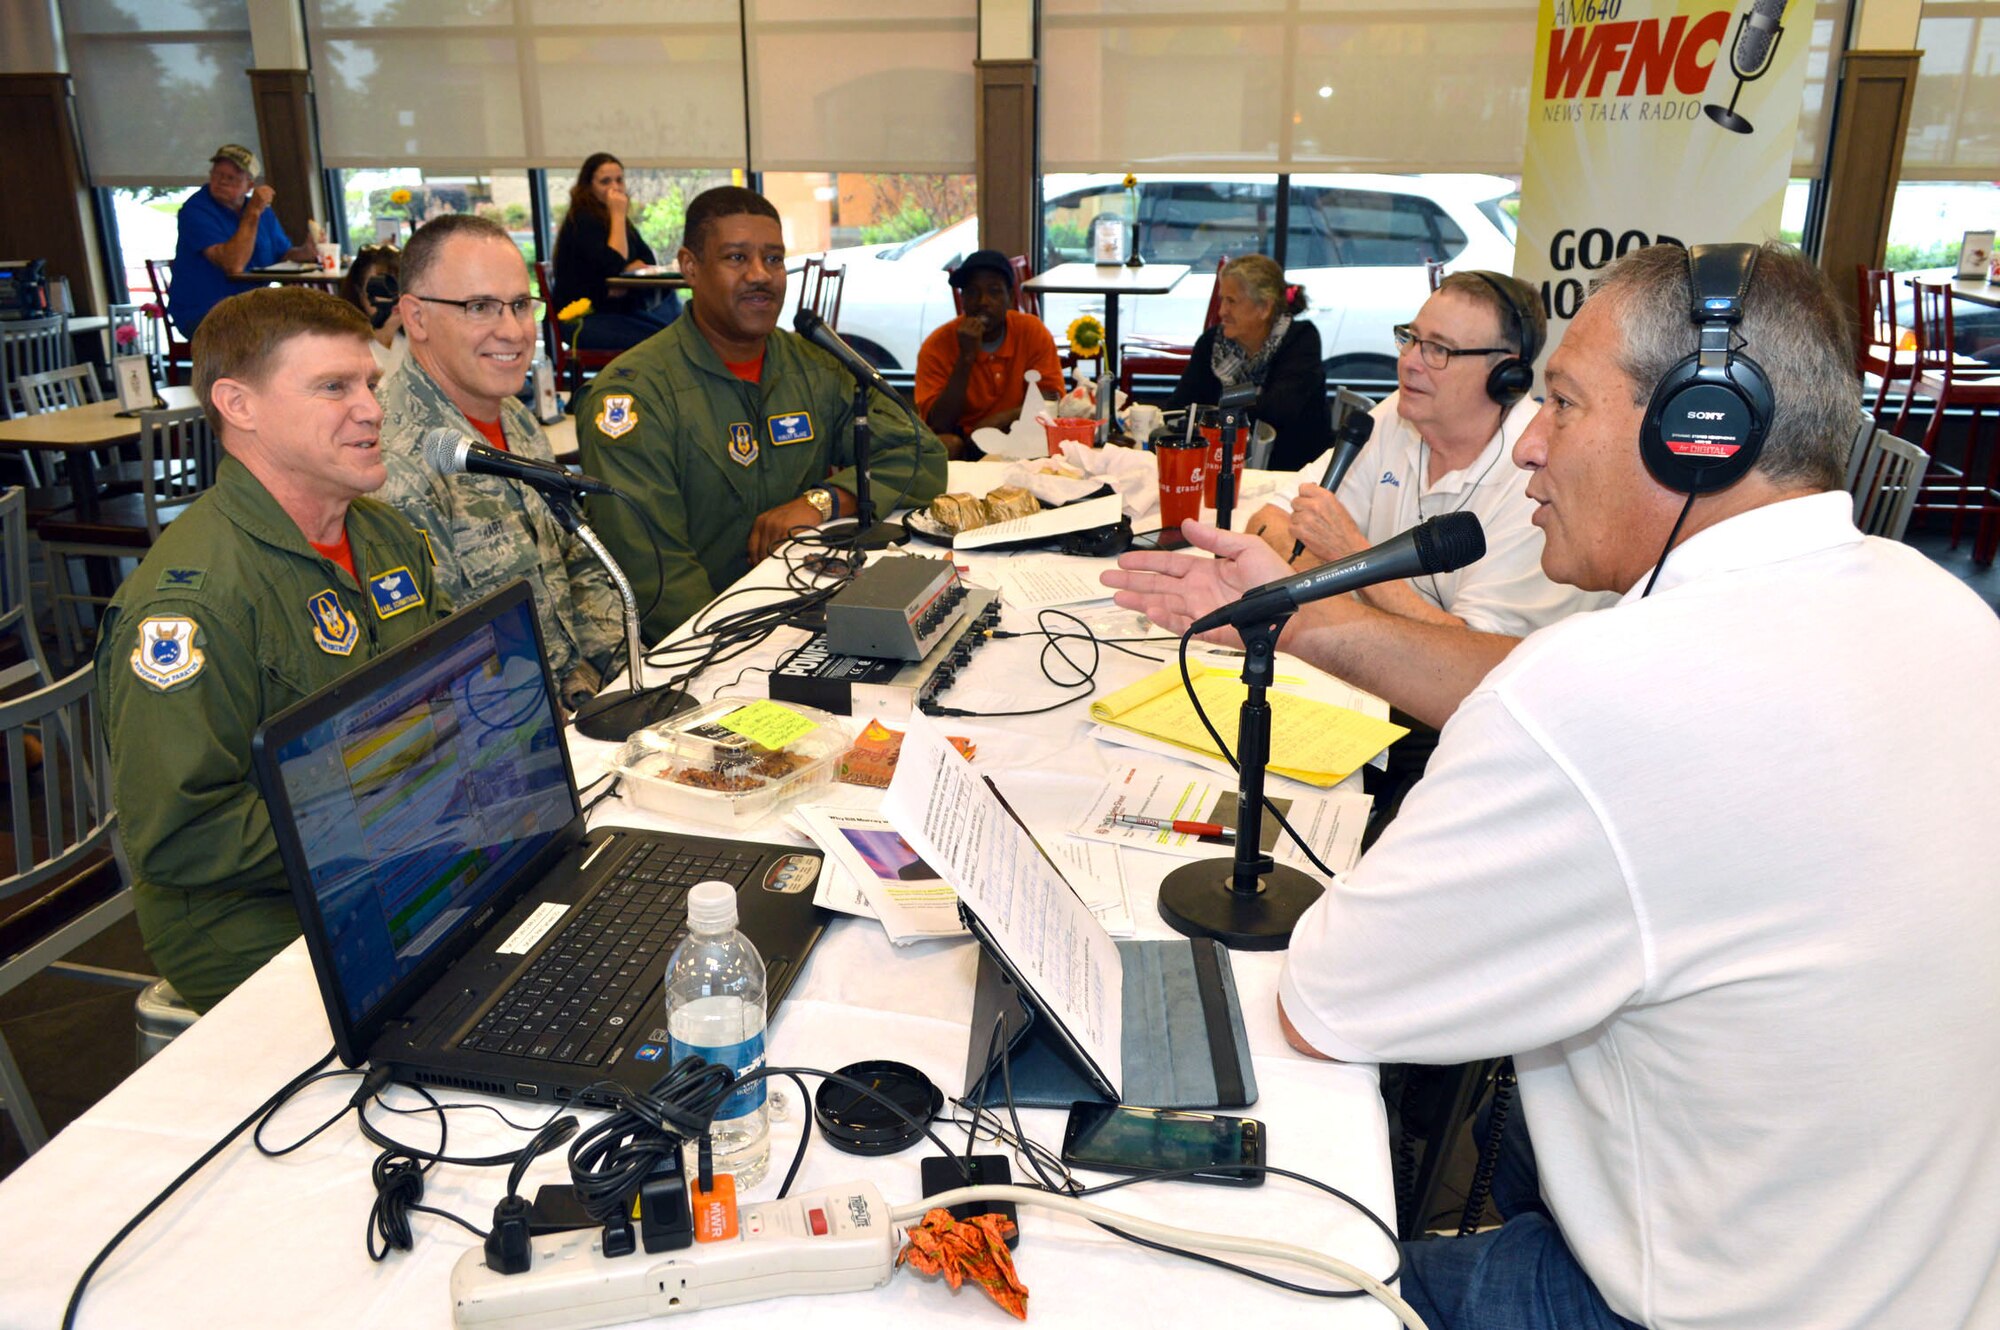 Col. Karl Schmitkons, 440th Airlift Wing commander, left, Command Chief Master Sgt. Rocky Hart, 440th AW command chief, middle, and Col. Robert Blake, 440th AW vice commander, right, join Jeff "Goldy" Goldberg and Jim Cooke of WFNC 640 AM radio for a live on-air interview celebrating the third anniversary of WFNC's 'Good Morning Fayetteville' radio show Sept. 25, 2015,at the Chick-fil-A on Skibo Road, Fayetteville, North Carolina. (U.S. Air Force photo/Marvin Krause)